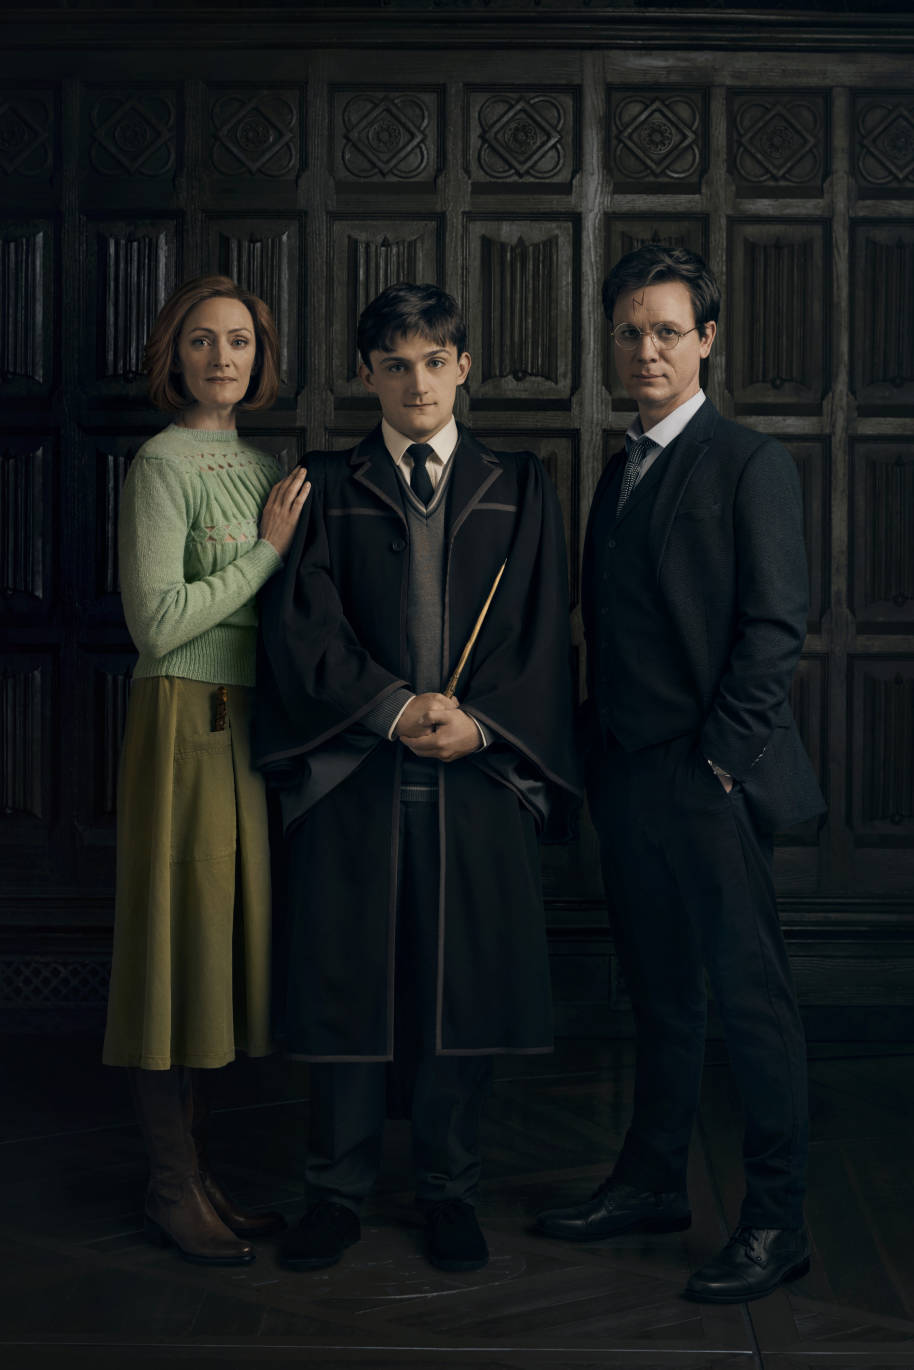 CC Harry Potter and the Cursed Child Cast 3: Harry, Ginny, Albus